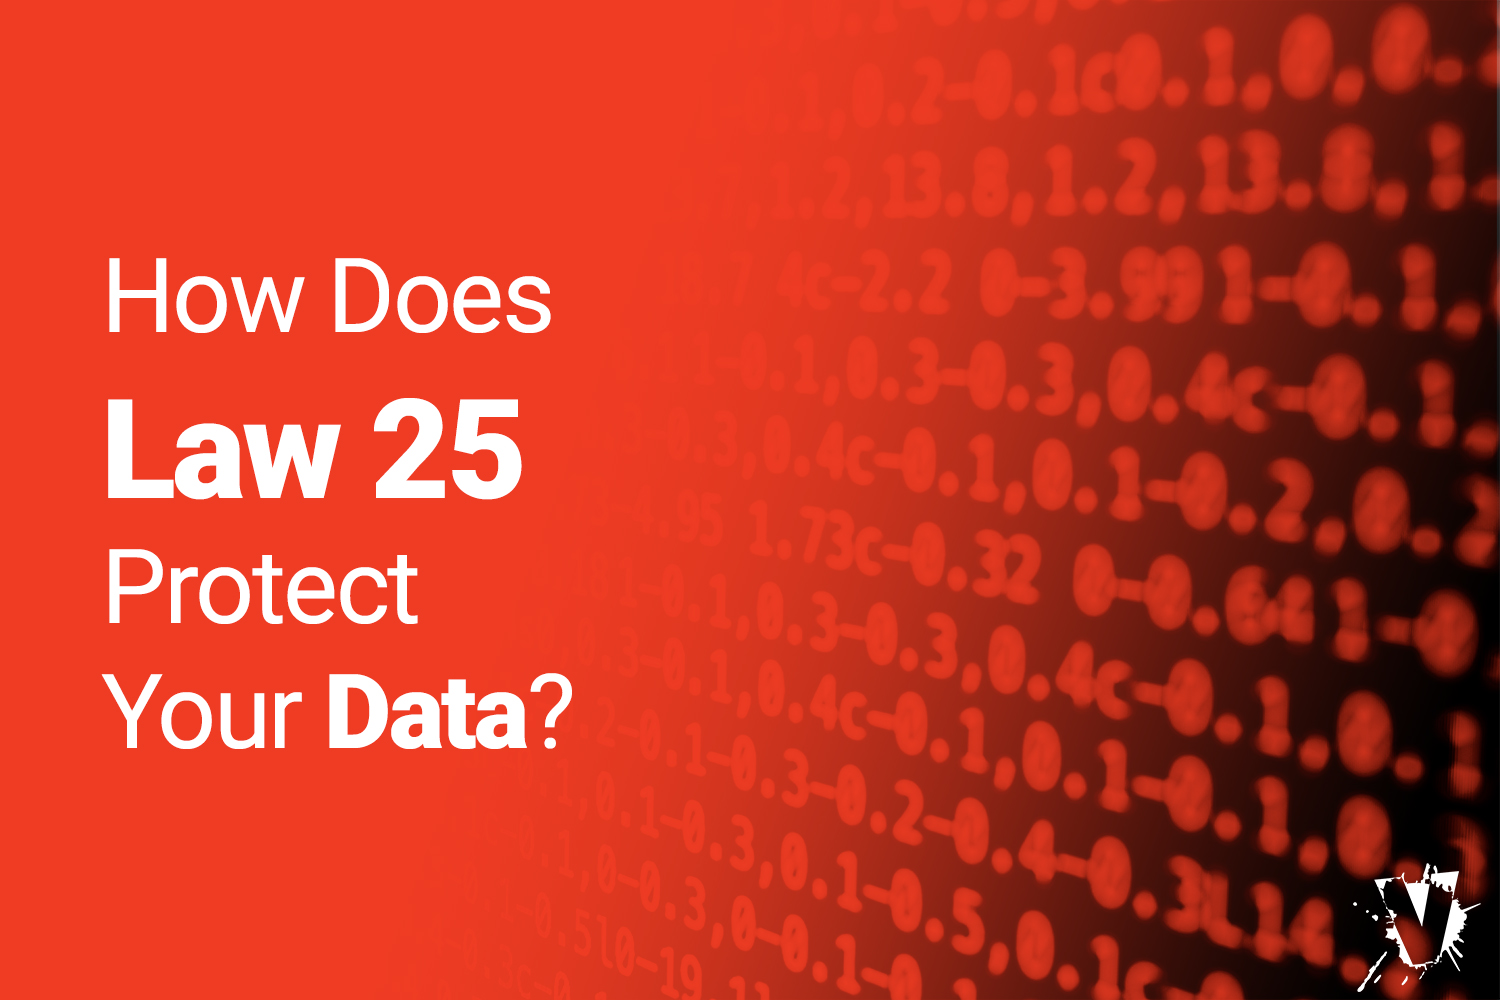 How Does Law 25 Protect Your Data?